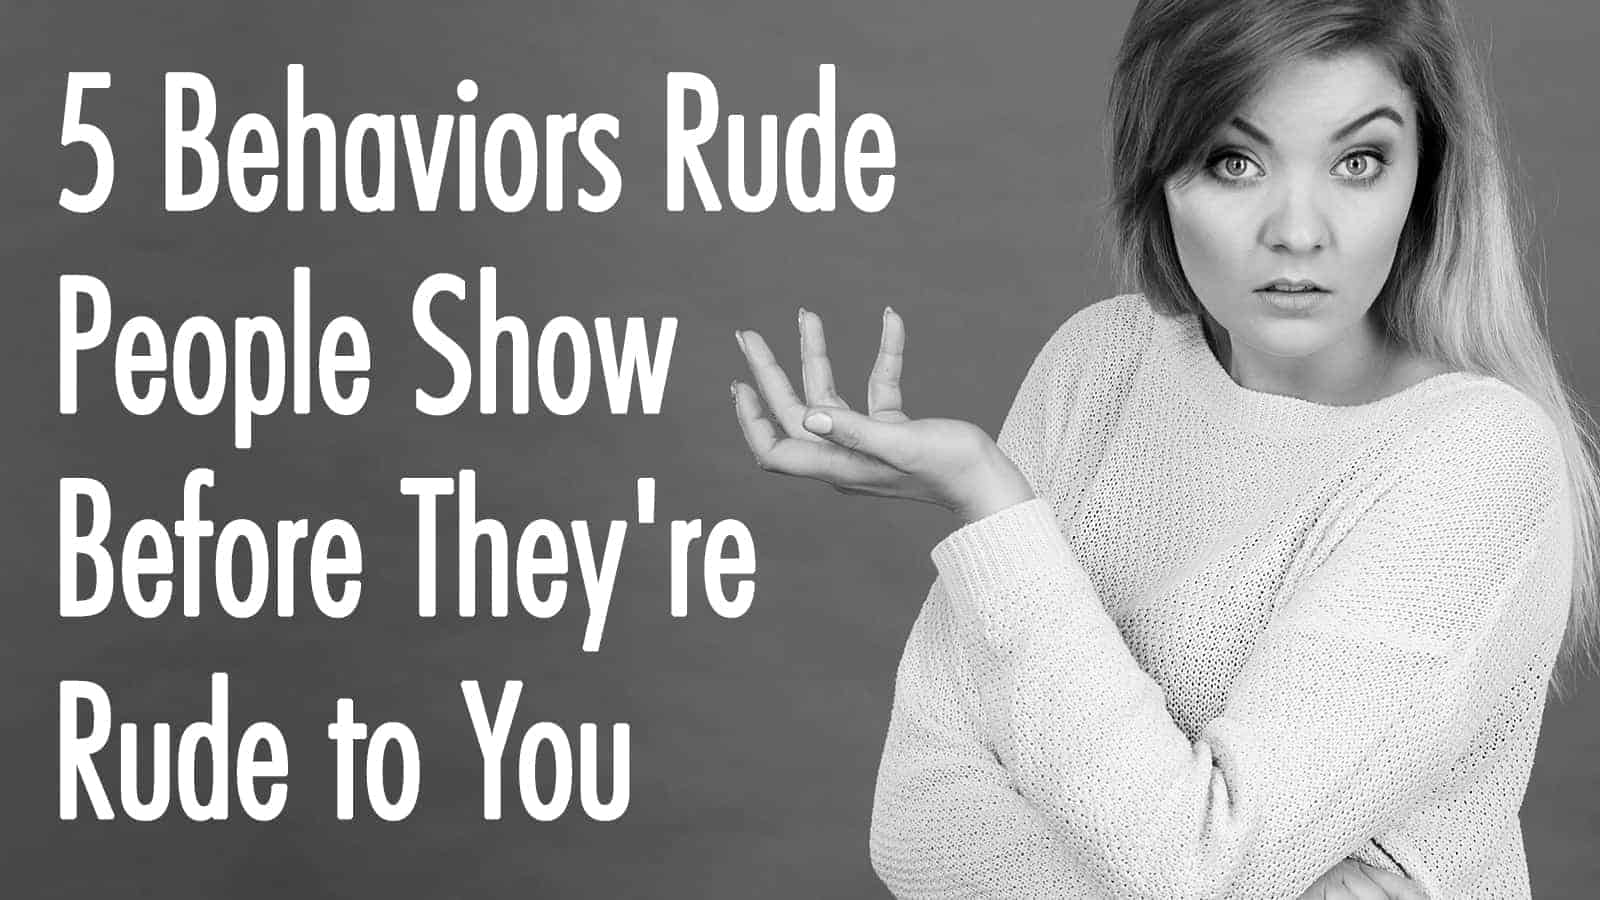 5 Behaviors Rude People Show Before They’re Rude to You